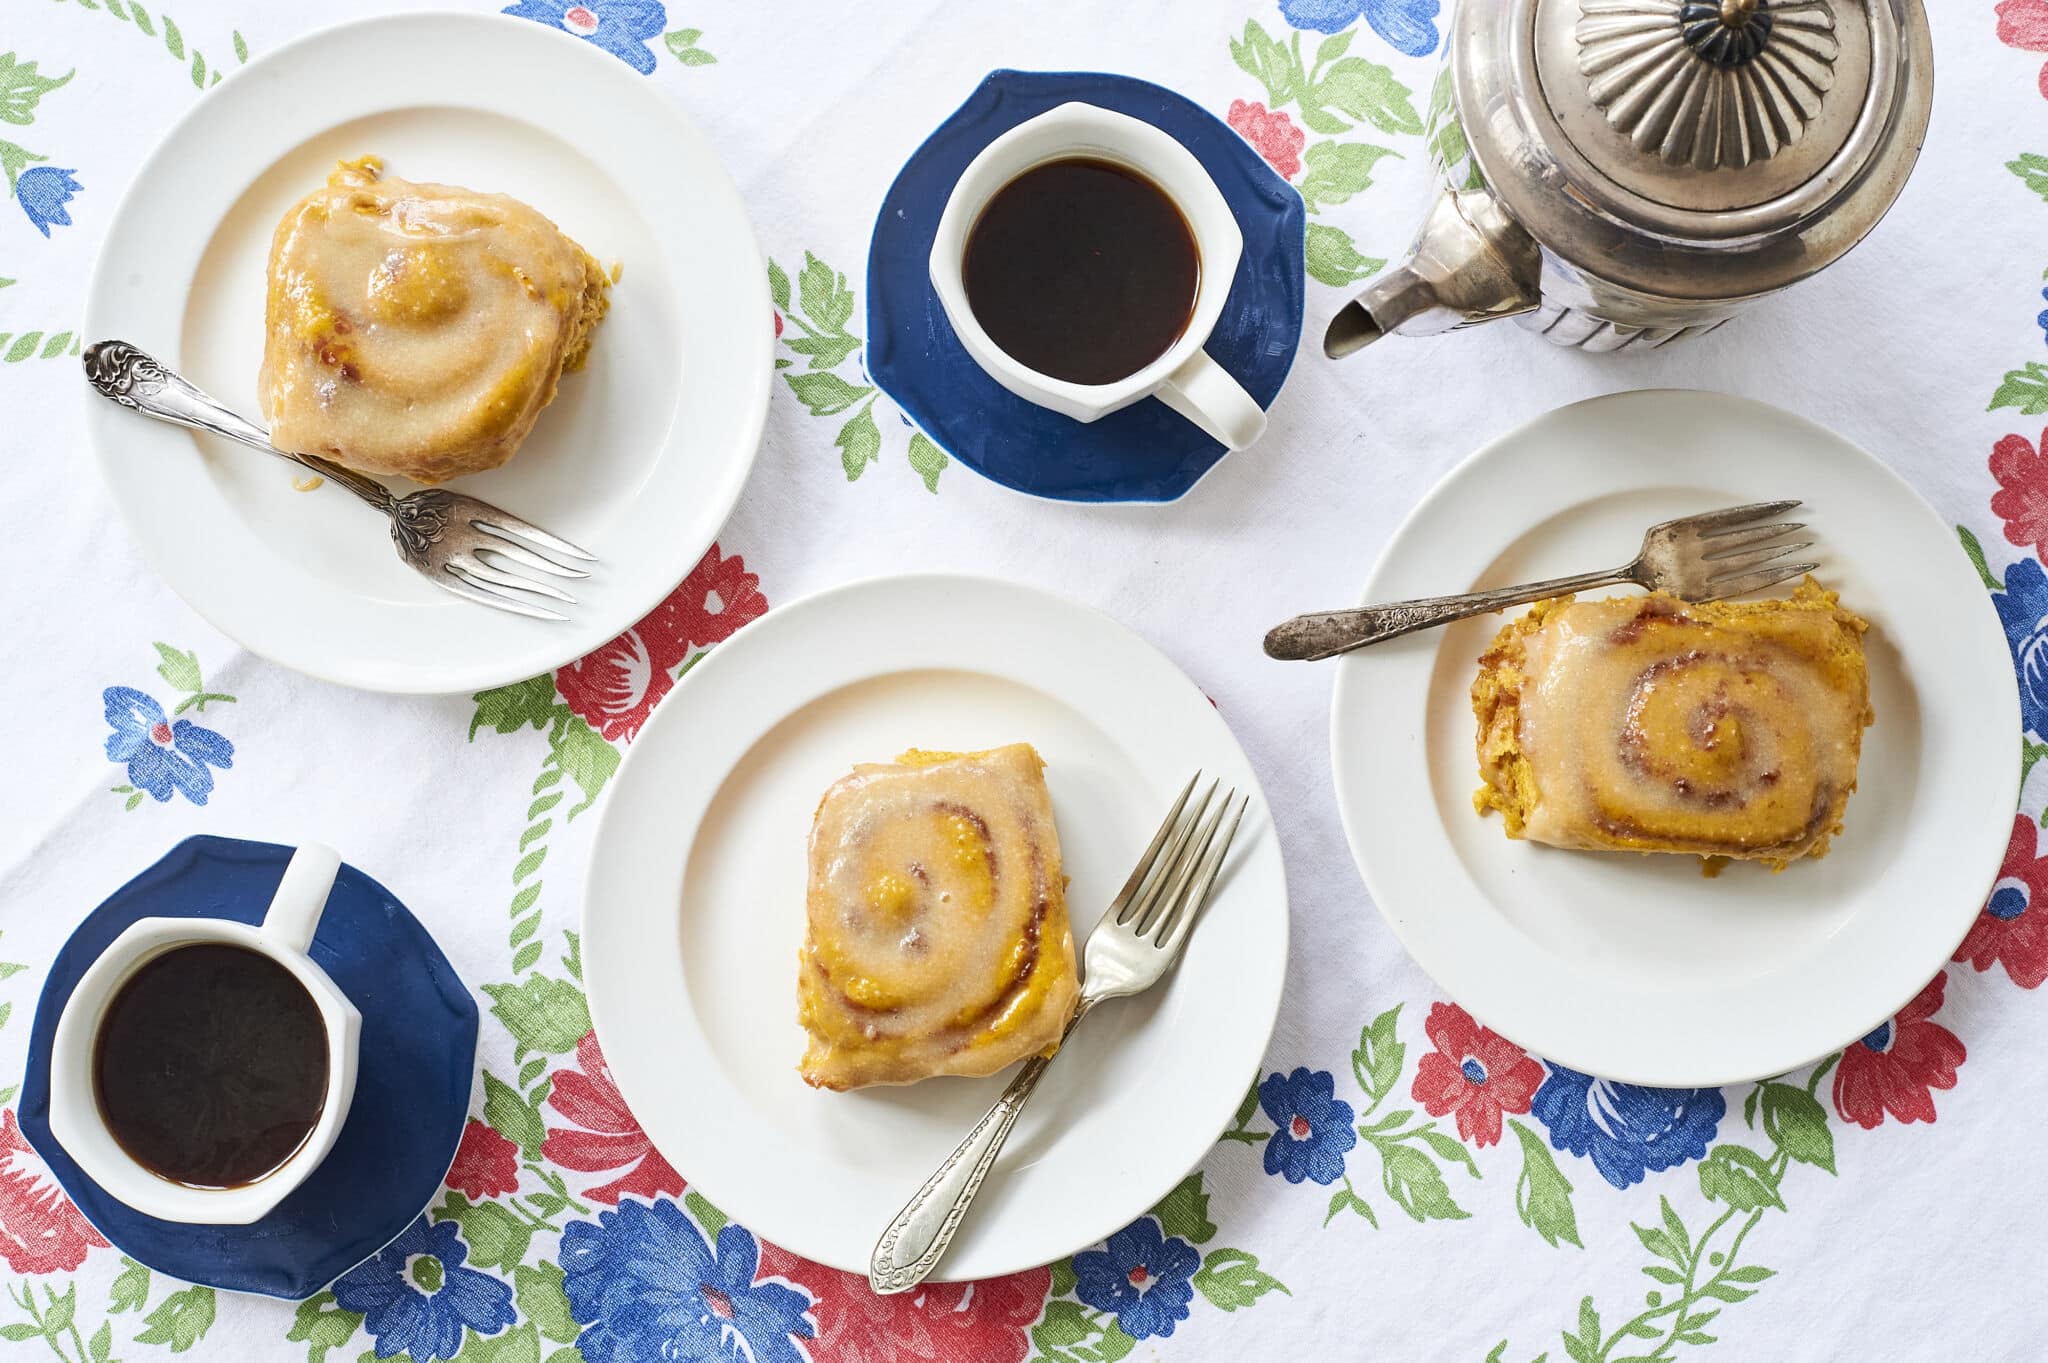 Three homemade Pumpkin Cinnamon Buns are served on white dishes with mugs of black coffee.